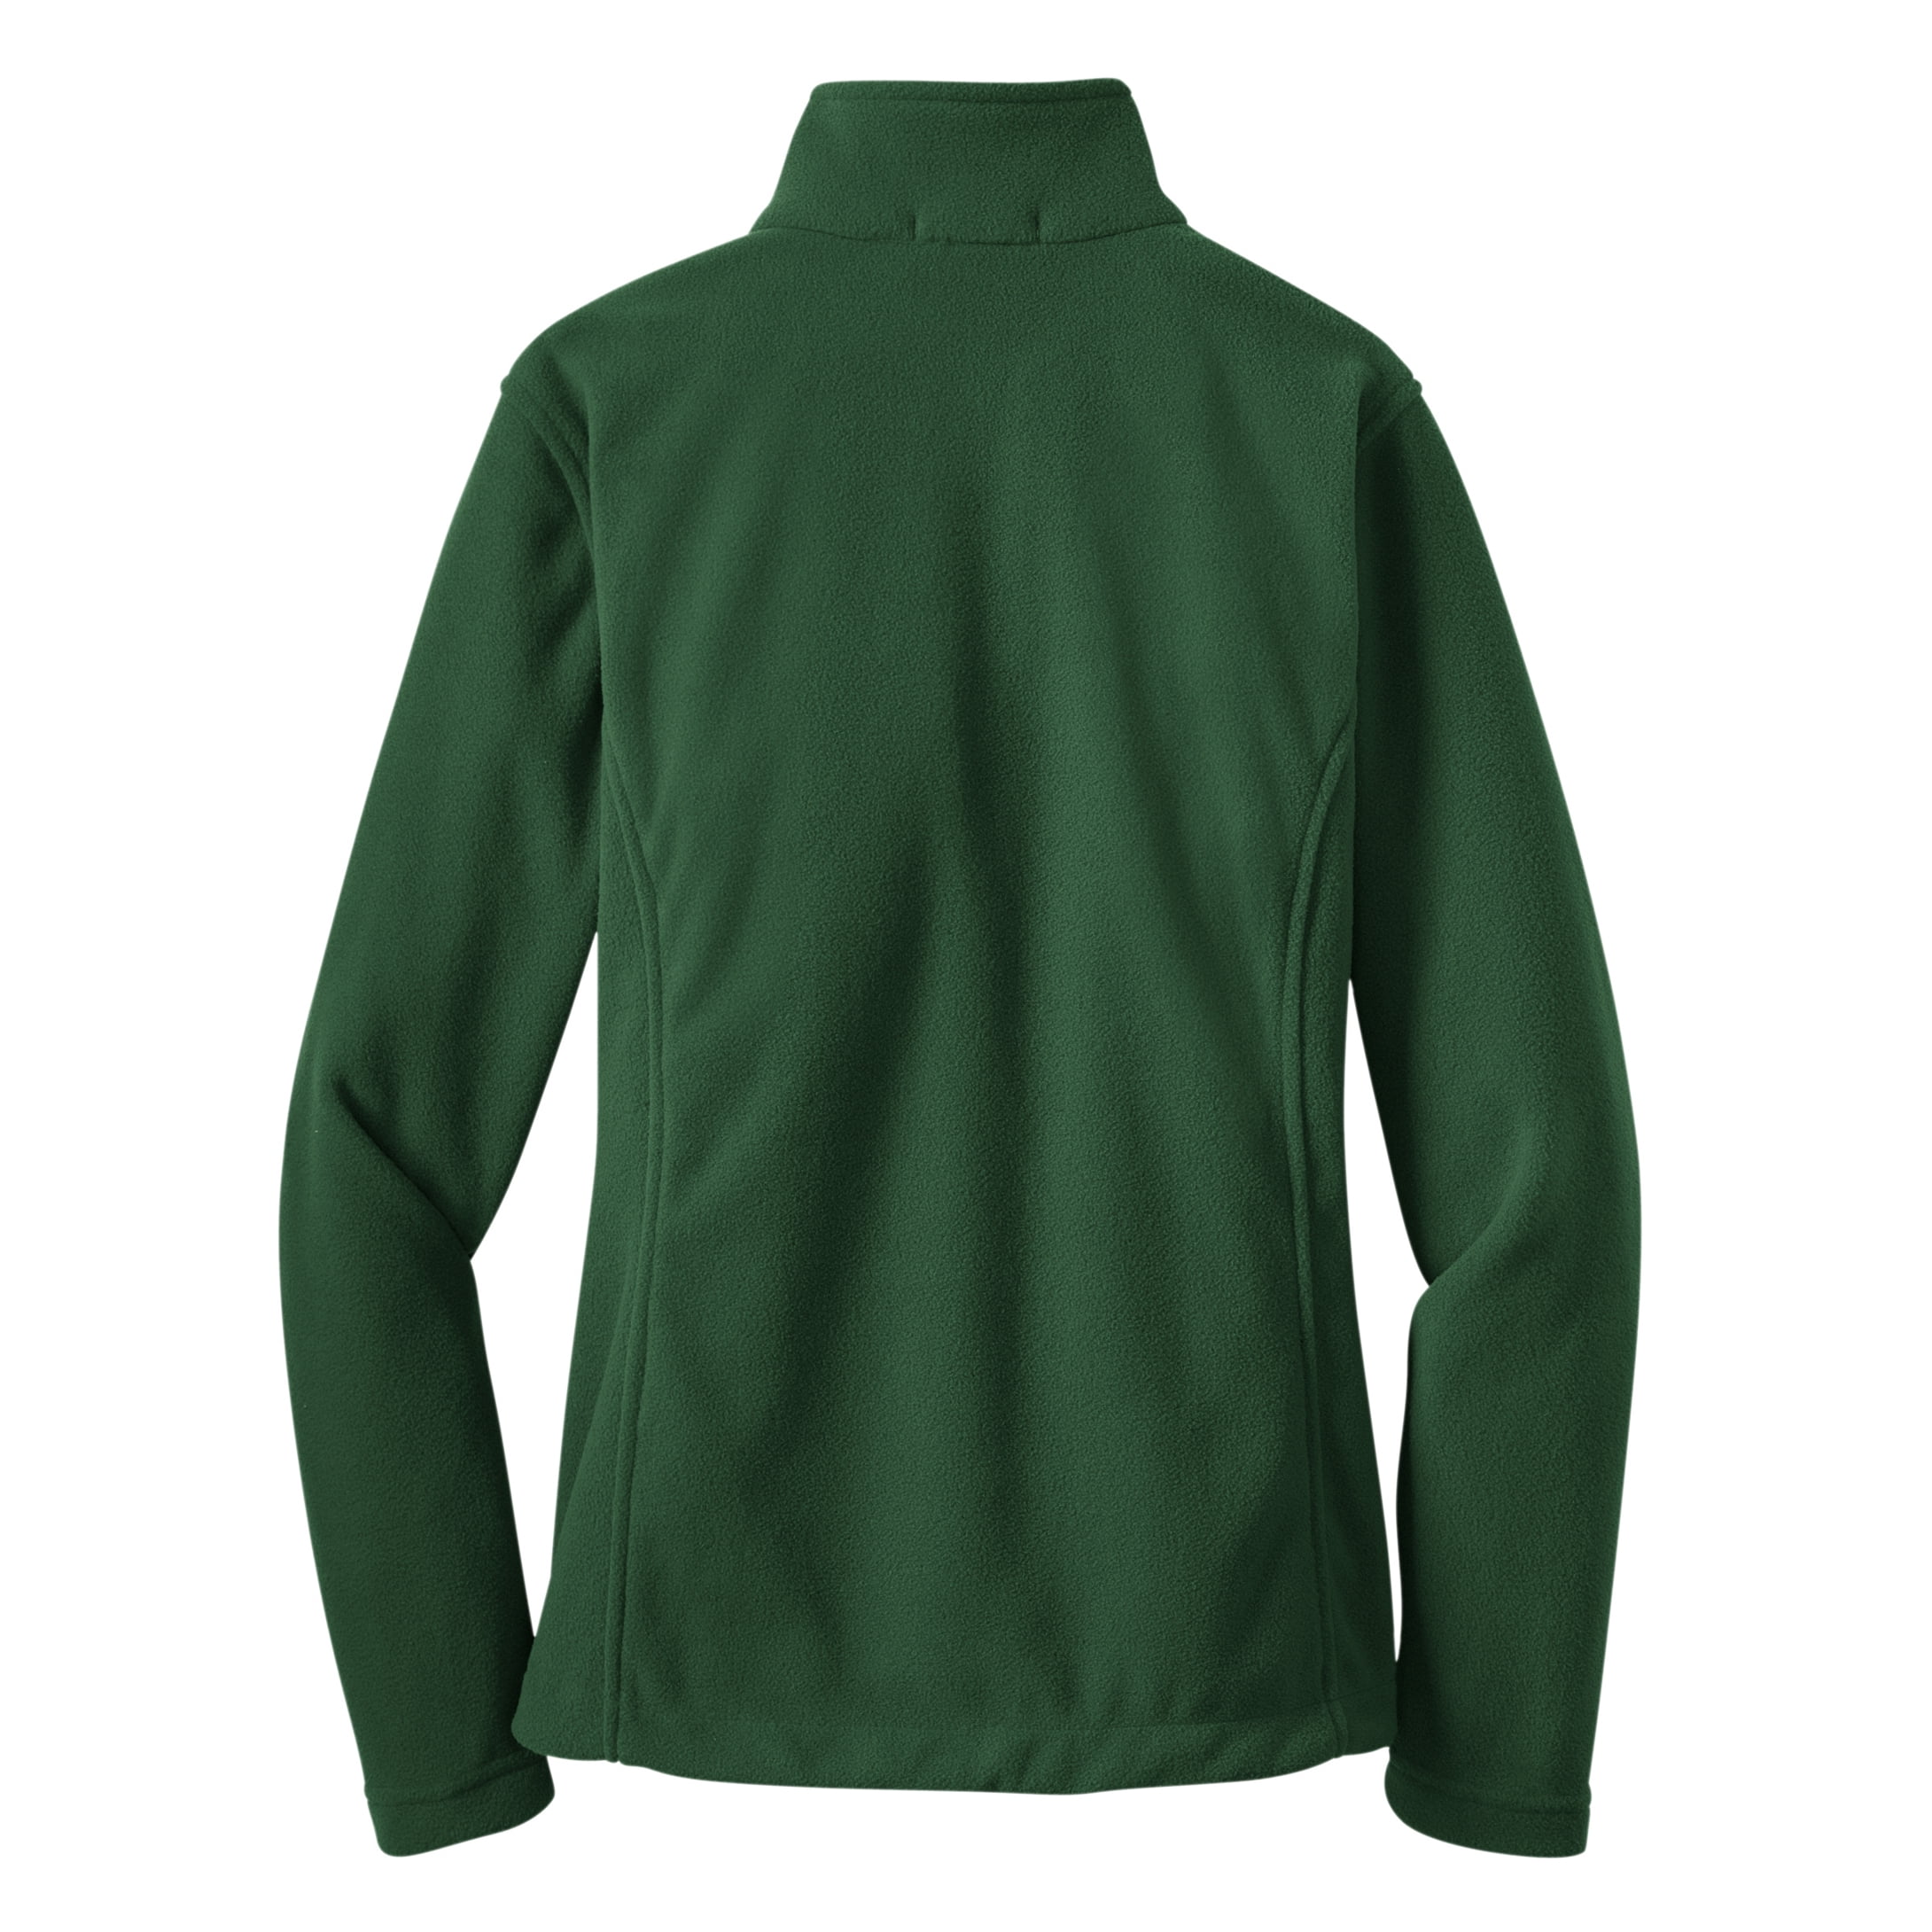 Womens Value Fleece Polyester Jacket Forest Green 4X-Large